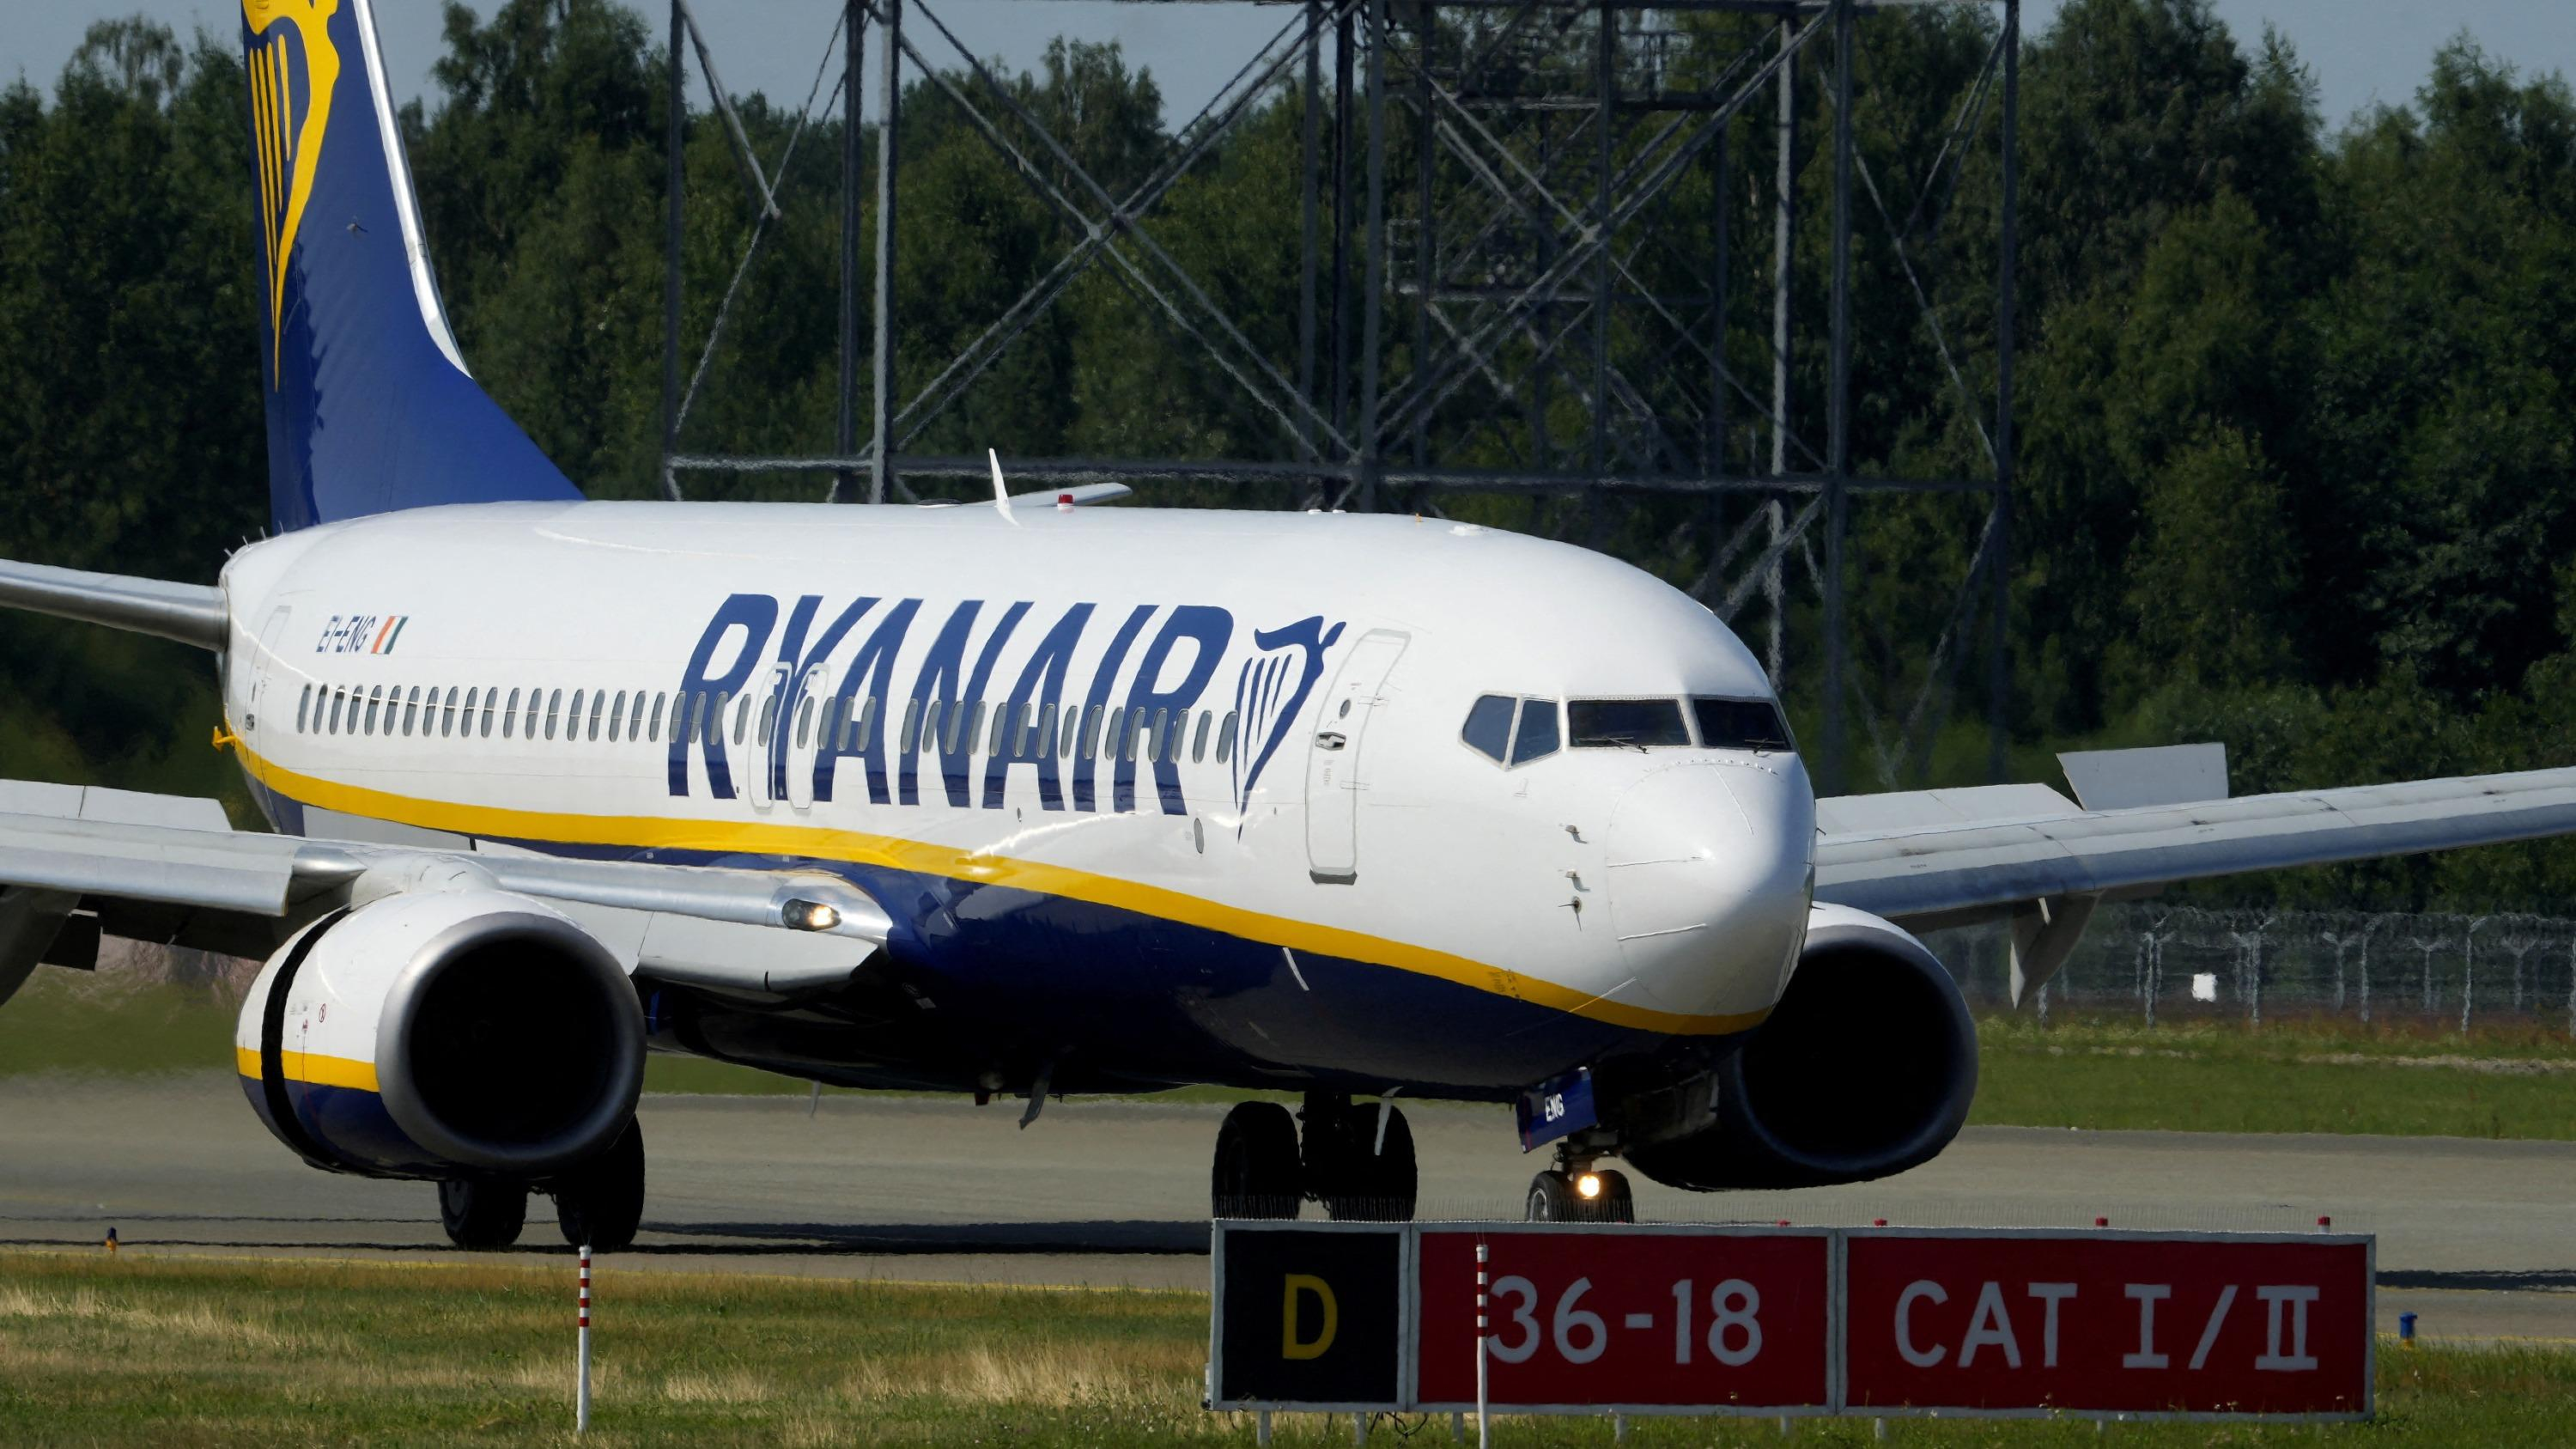 737 Max: Ryanair calls on Boeing to “significantly improve” its quality controls